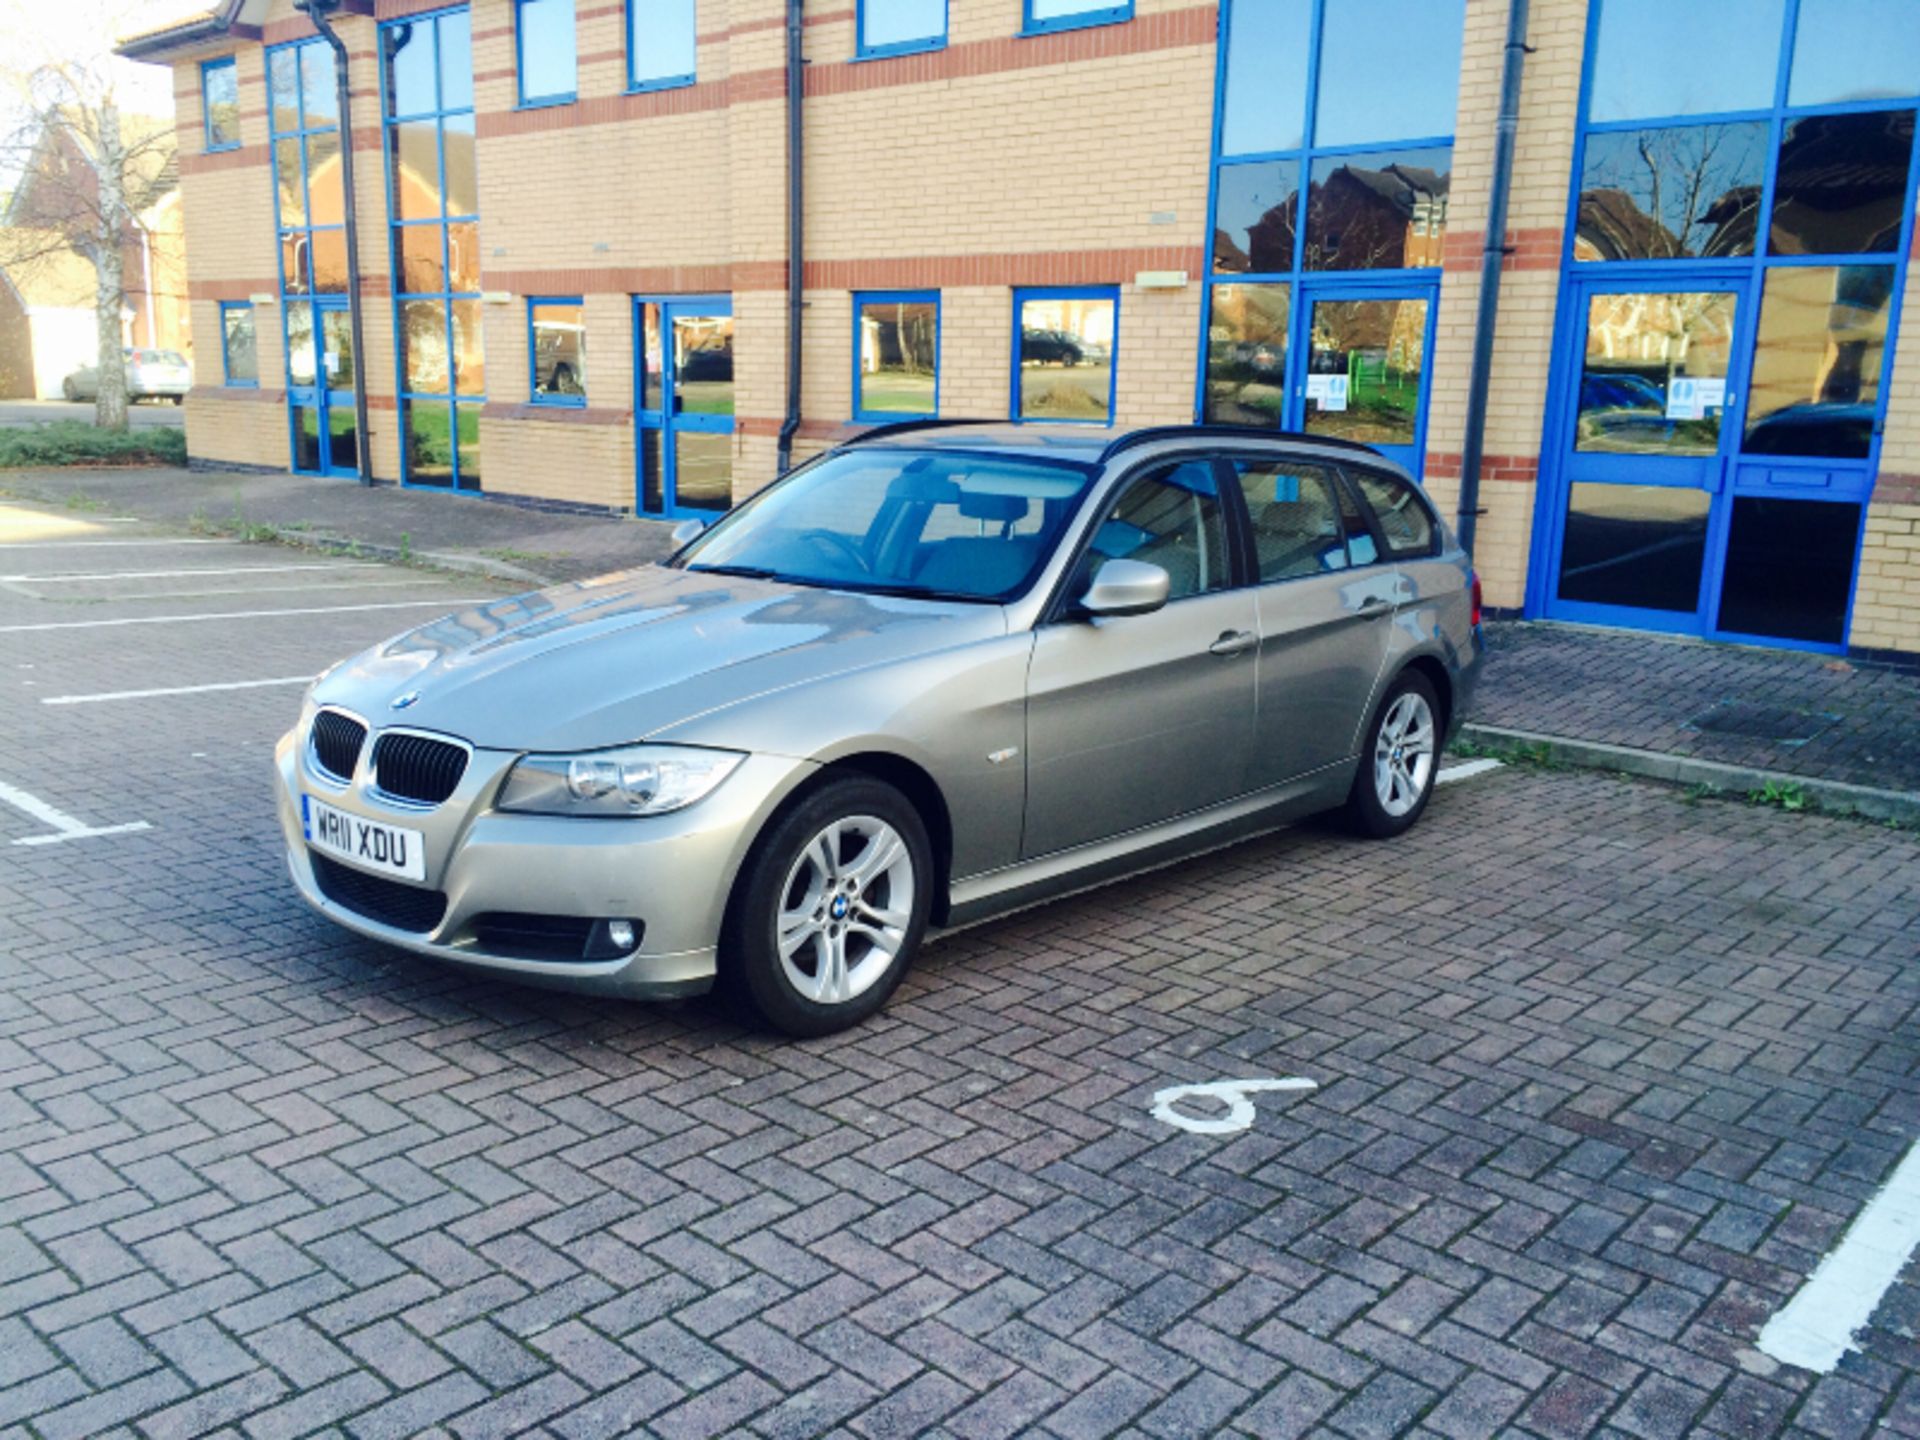 ON SALE ! BMW 318D DIESEL (2011 - 11 REG) 'SERVICE HISTORY BY BMW' START / STOP - AIR CON - EURO 5